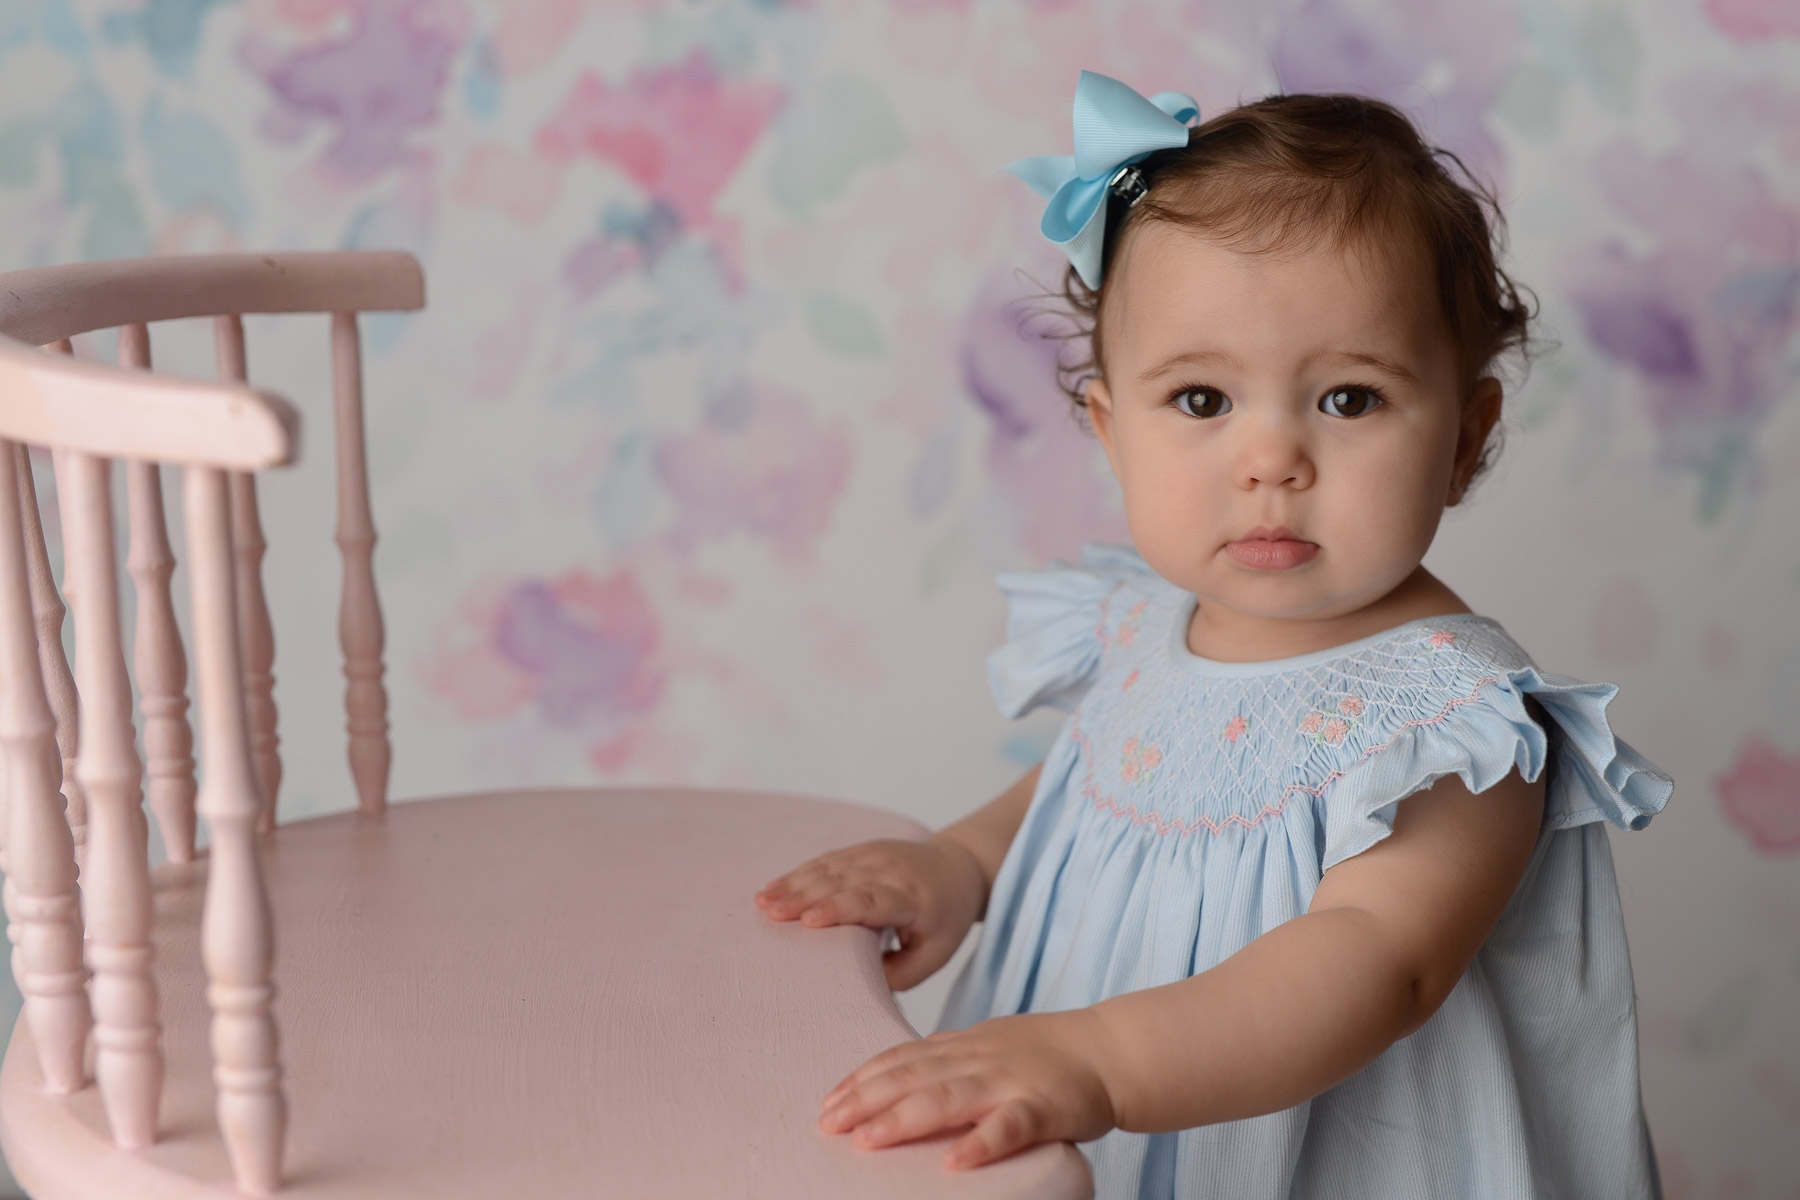 best cake smash photographer, baby photography queens ny, baby birthday portrait session